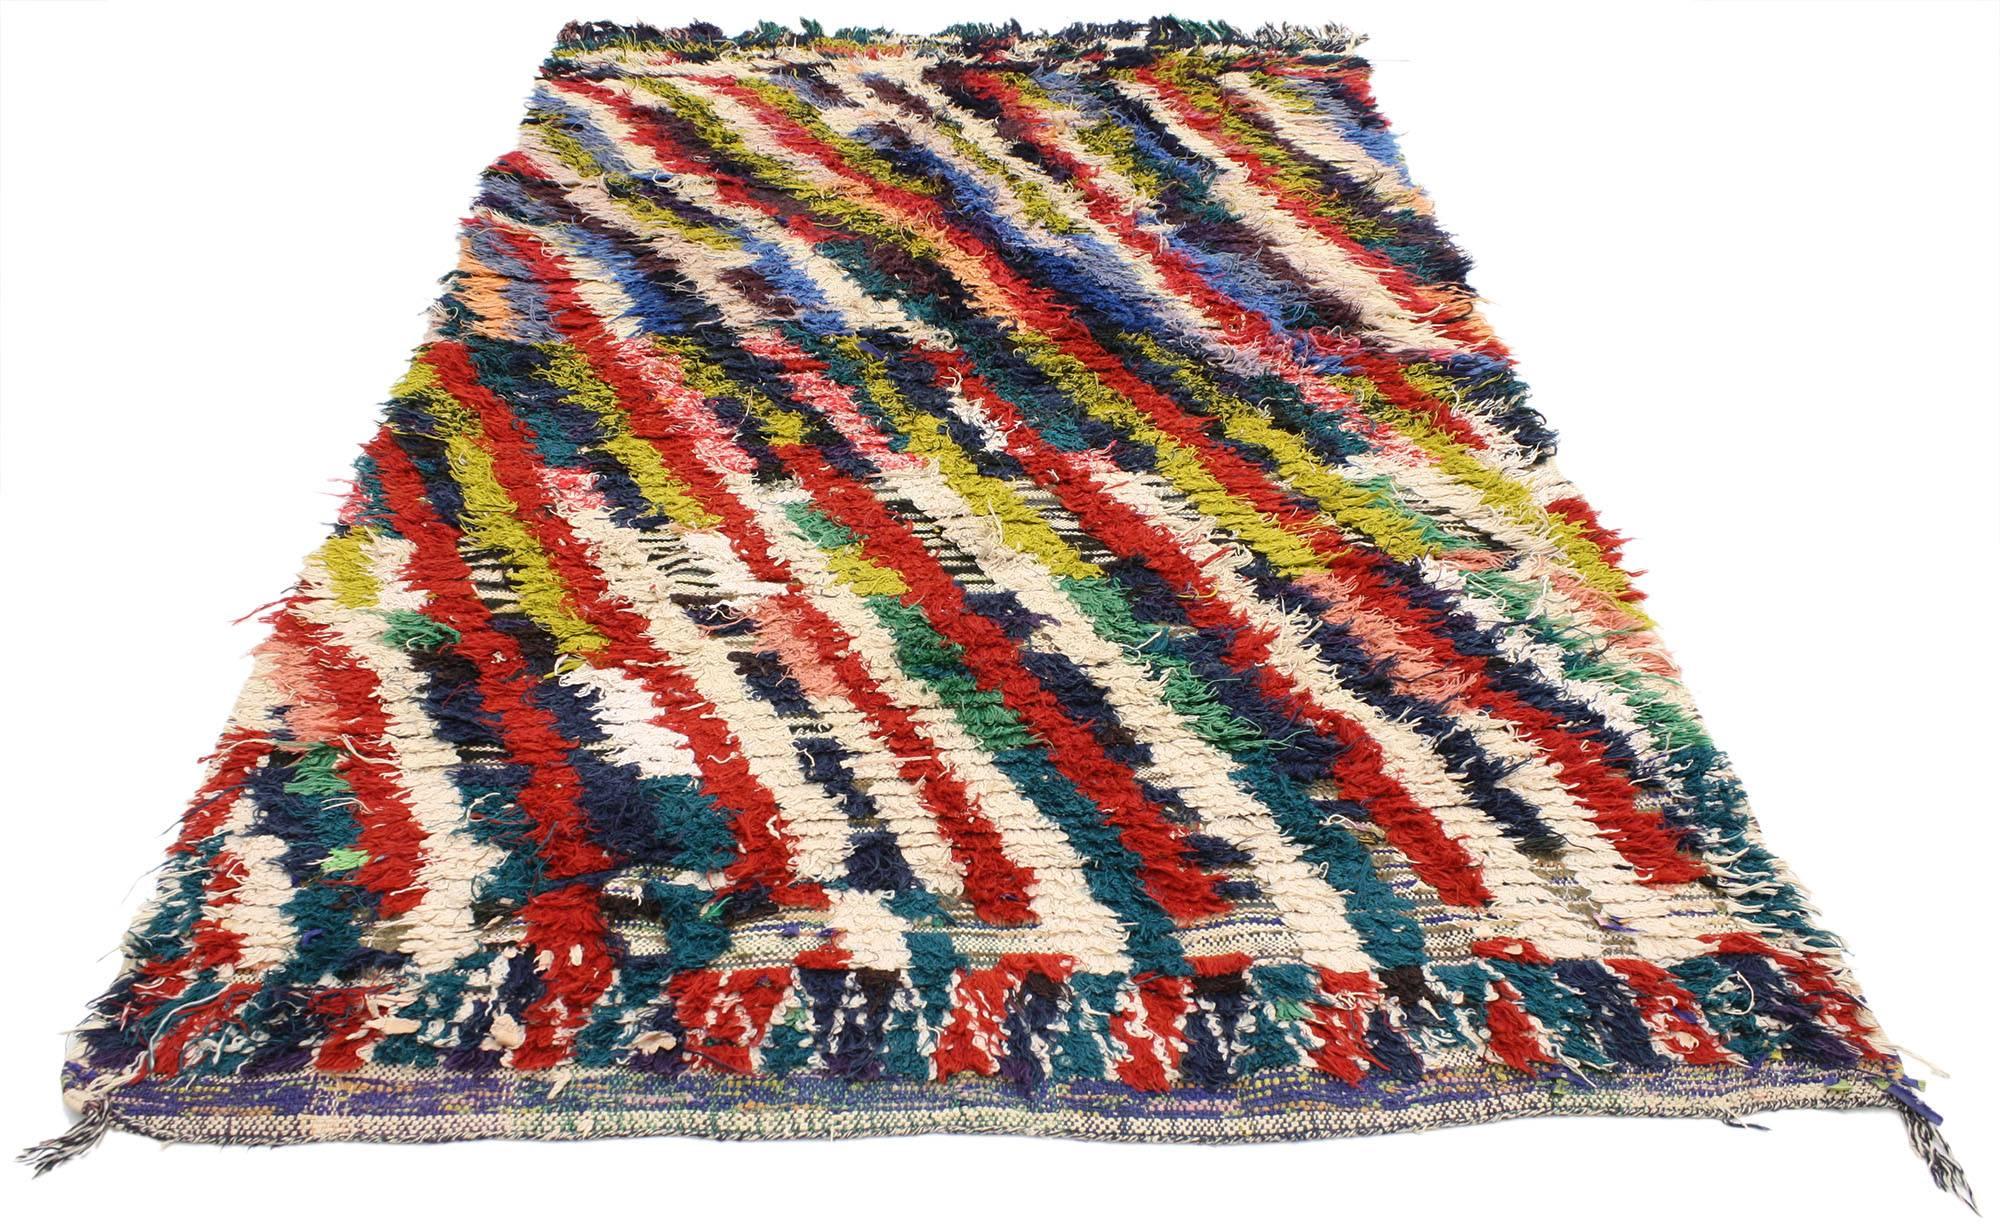 20577 Colorful Abstract Vintage Moroccan Boucherouite Rug, Inspired by Bridget Riley 03'07 x 05'11. Drawing inspiration from  with Bridget Riley's colorful diagonal stripes, this Moroccan Boucherouite rug marries vintage style of the Berber Tribes